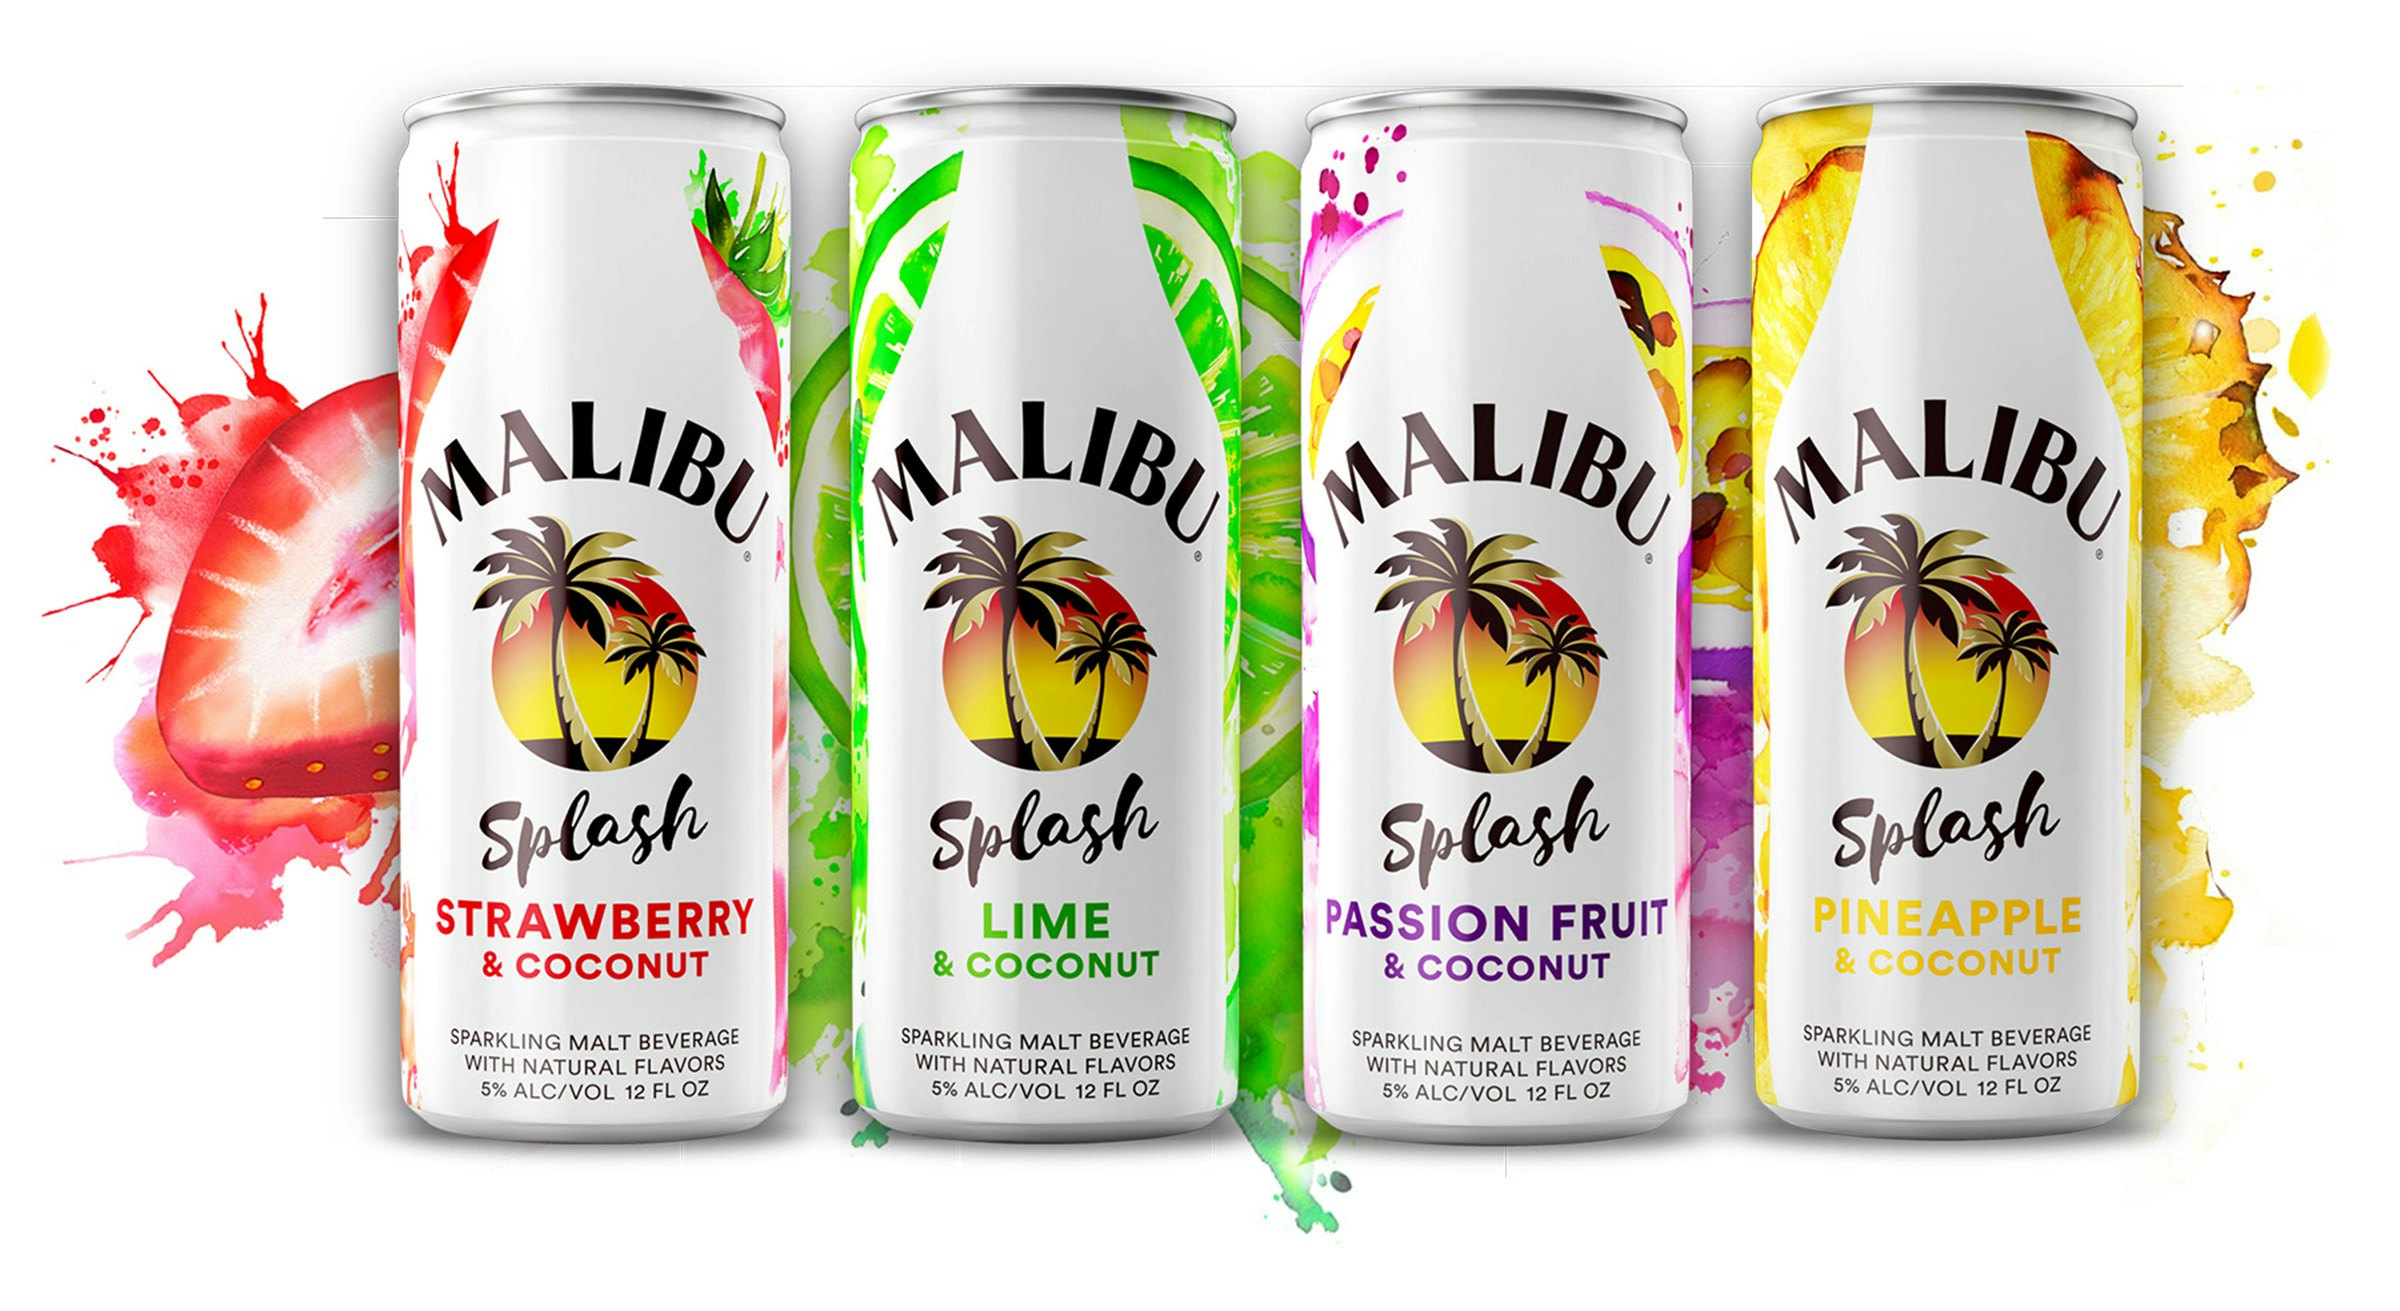 Here's Where To Buy Malibu Splash Canned Cocktails For A ...